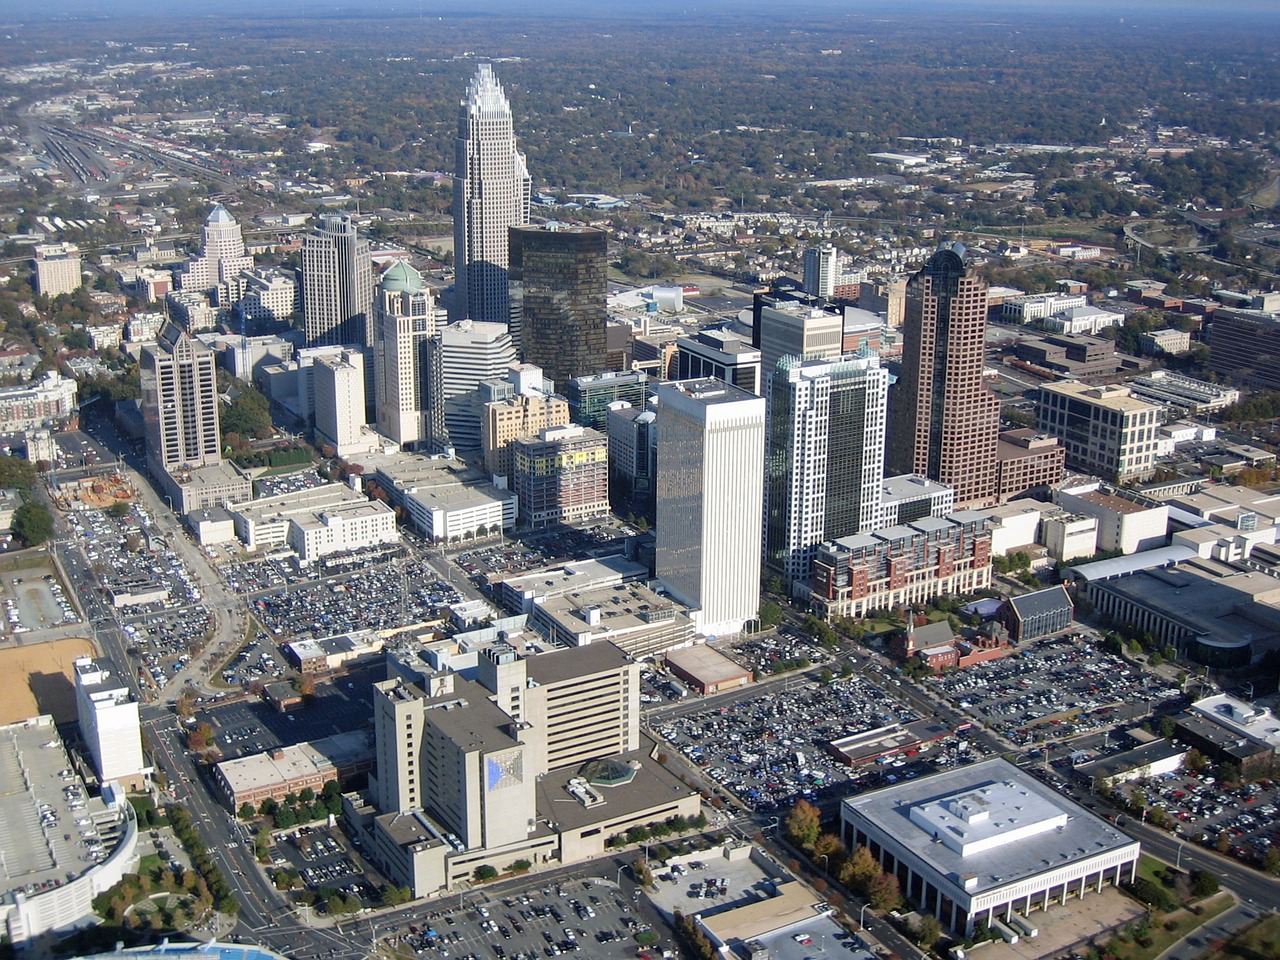 Uptown Charlotte aerial view